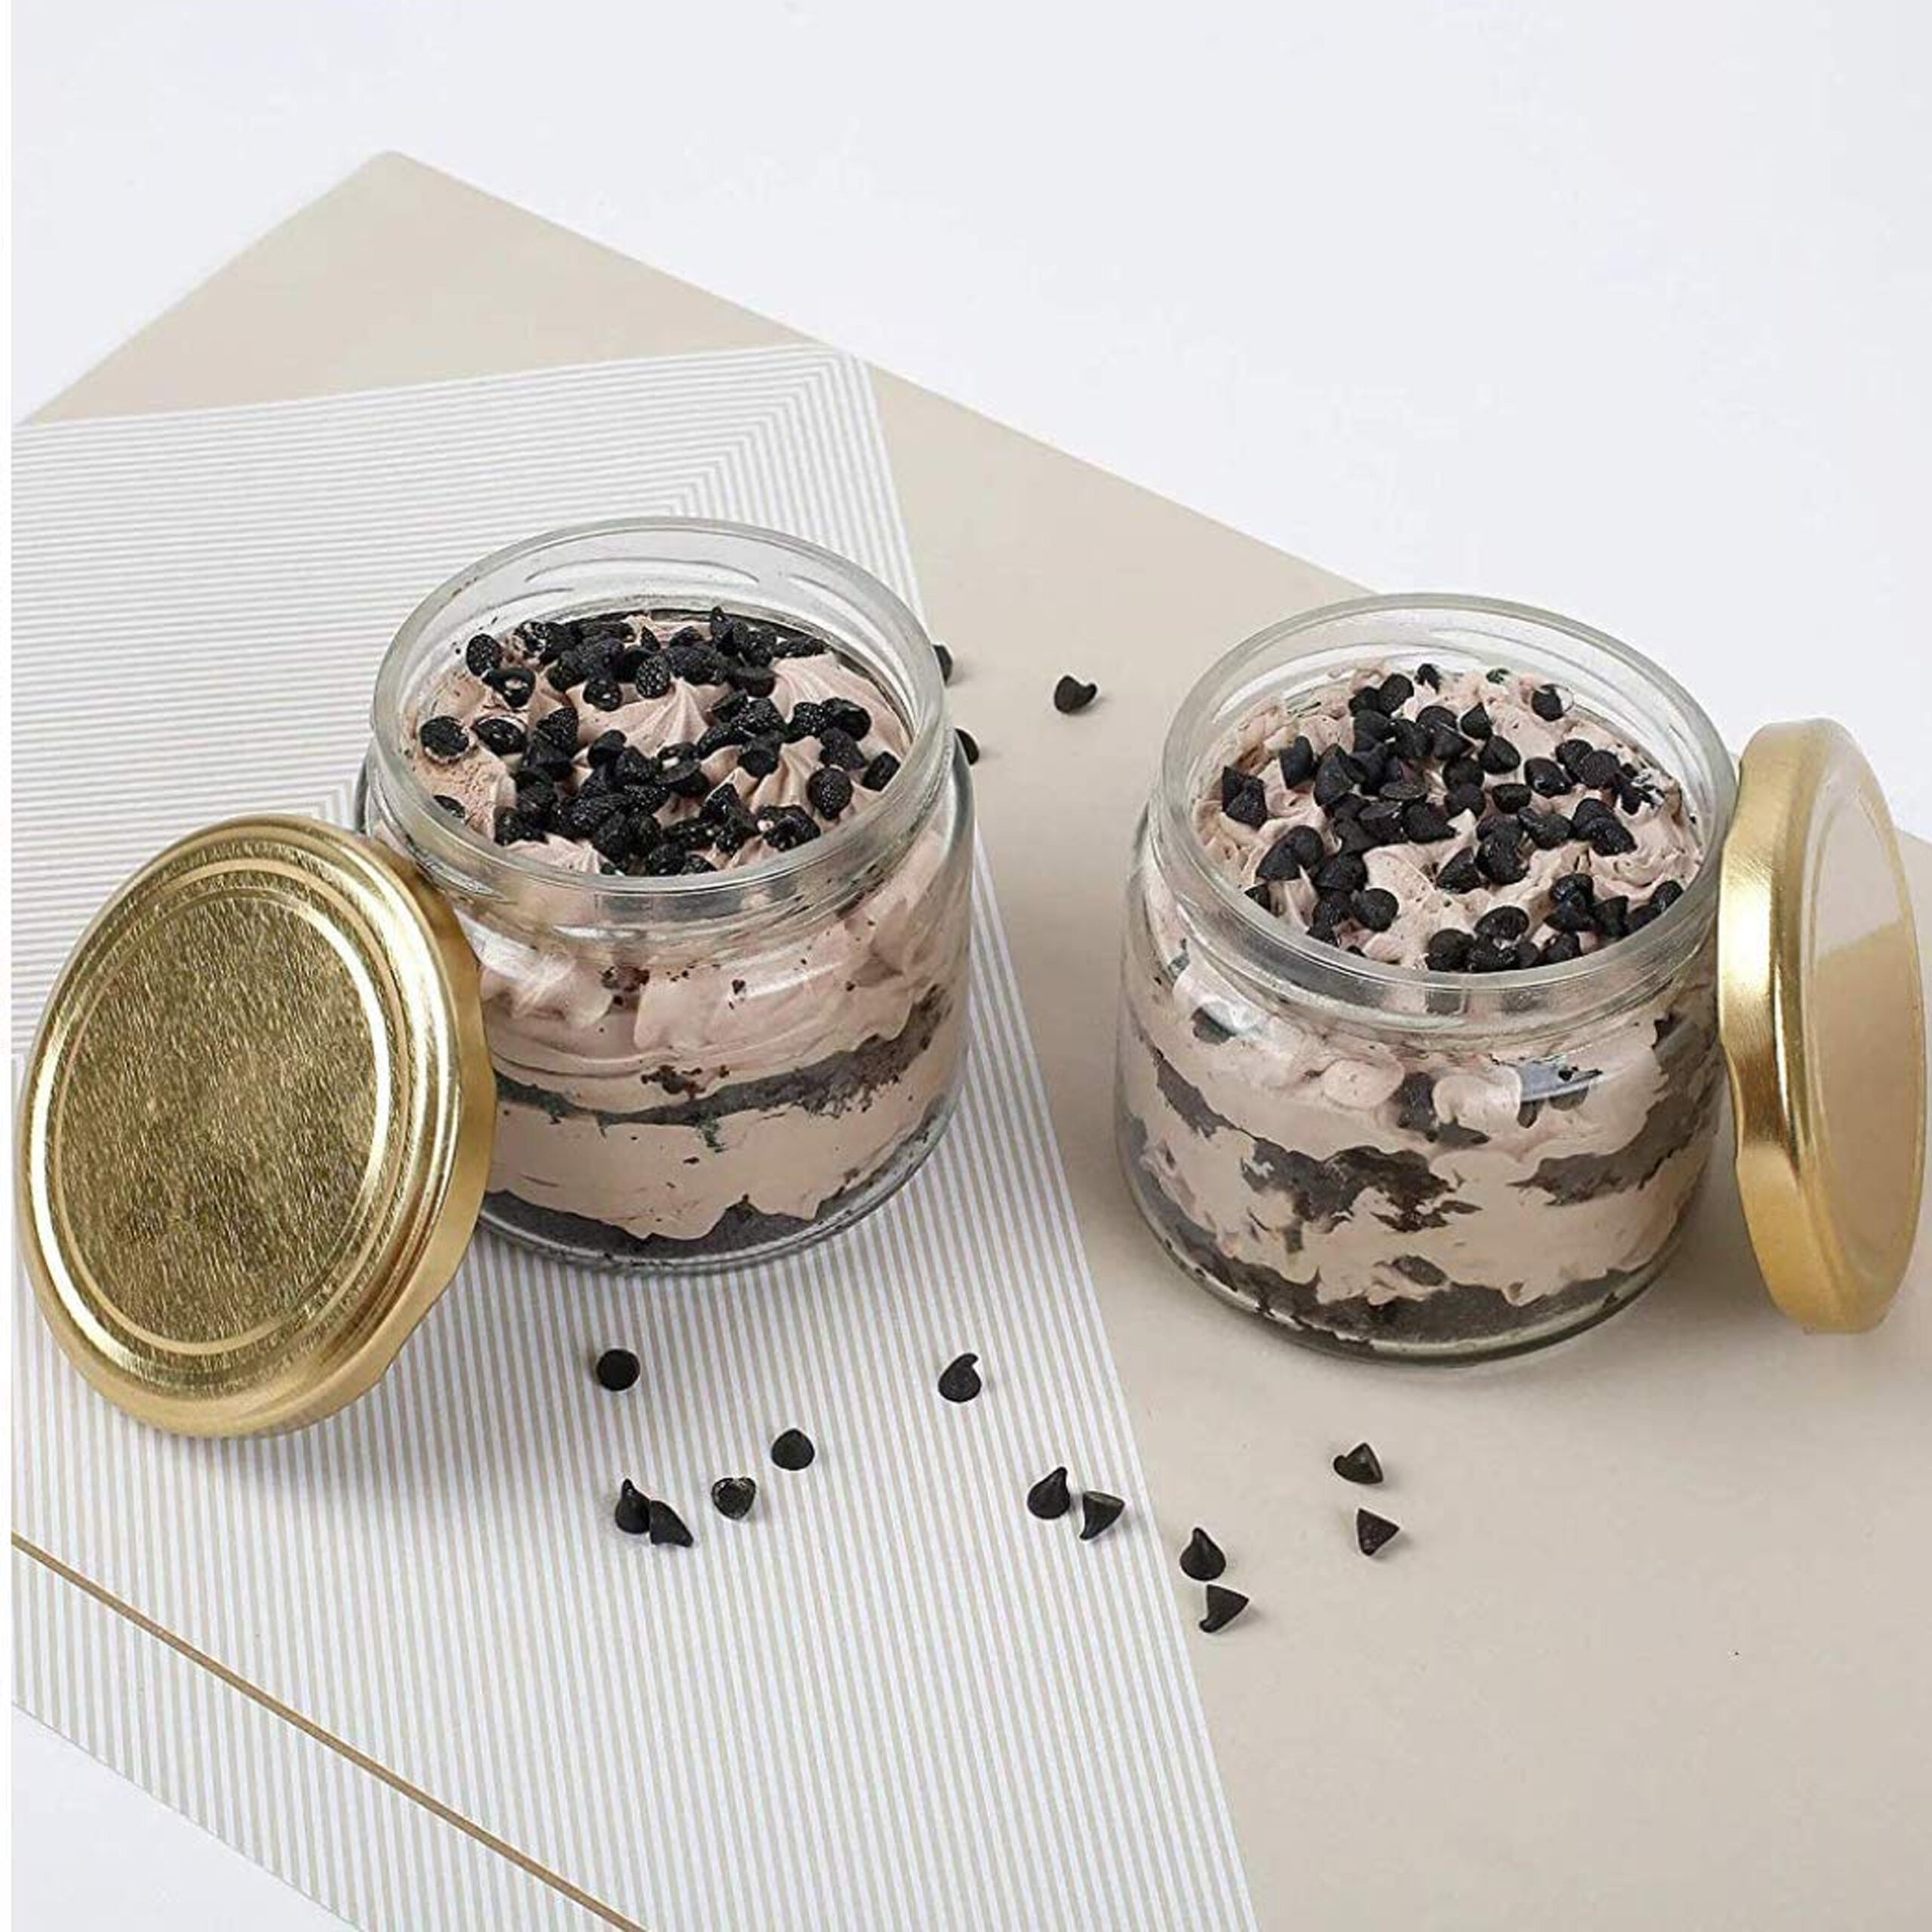 GLASS JAM JAR
WITH GOLD LID
28ml (30g)